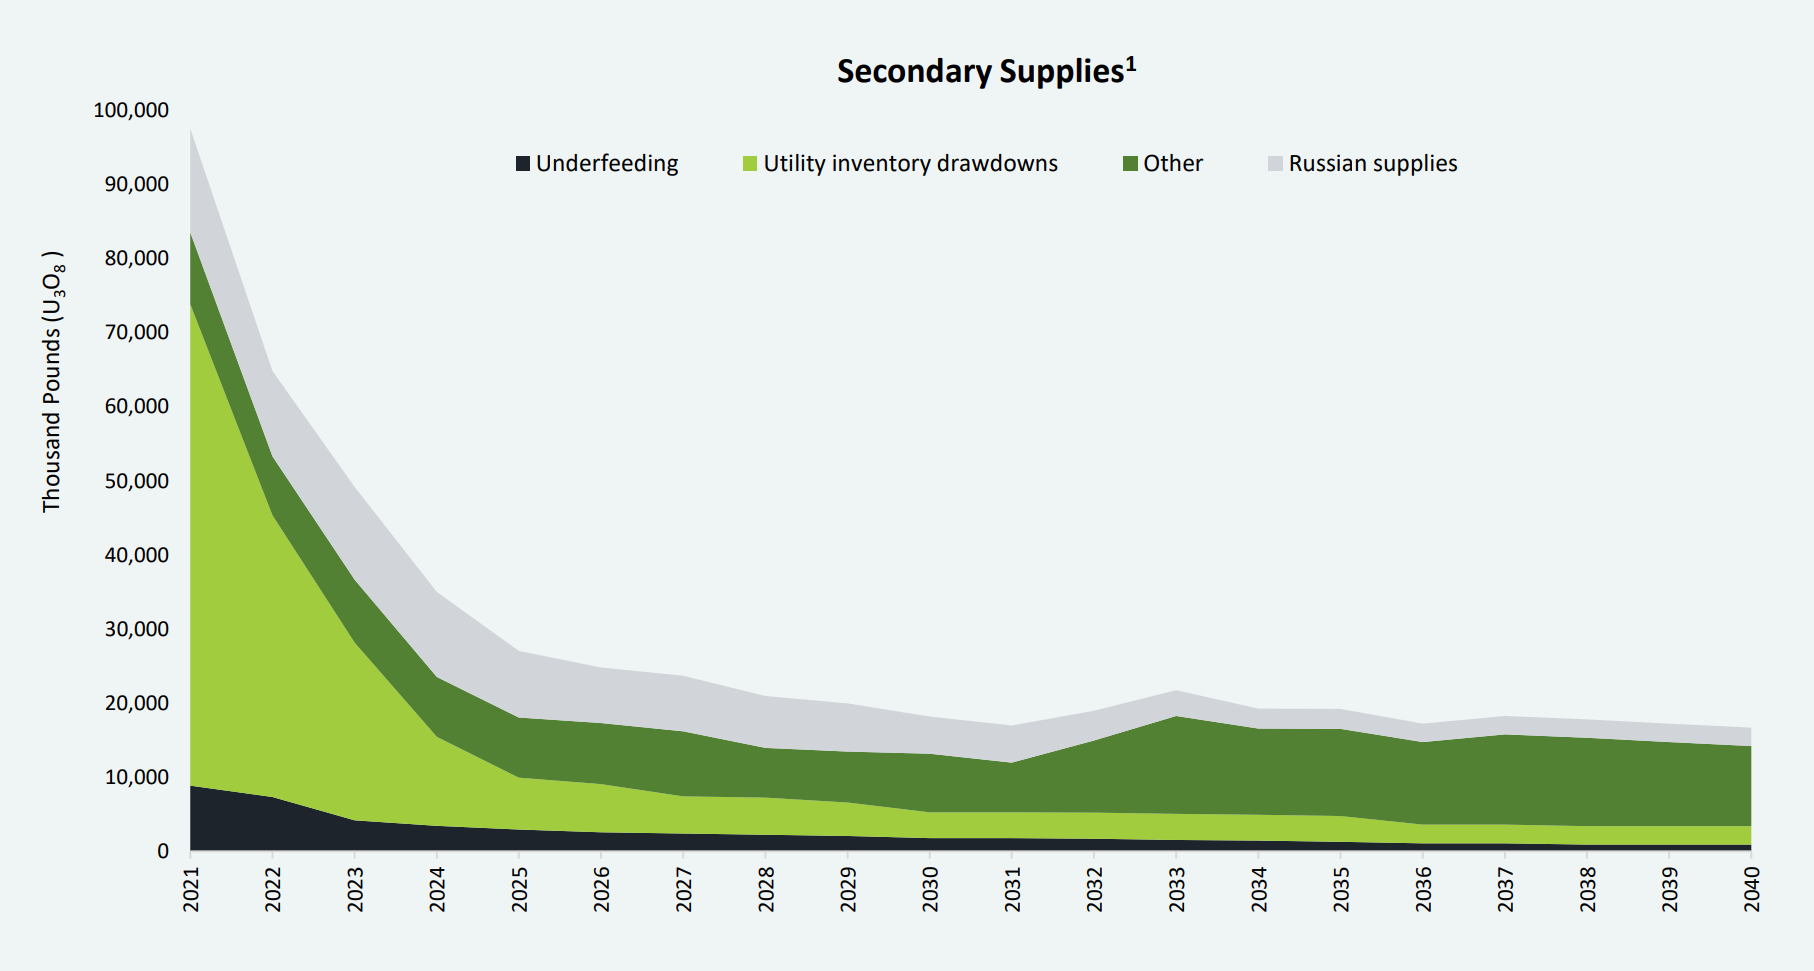 Source: Paladin Energy, UxC Market Outlook, Q2 2023. “Other” includes US Government supplies, MOX and reprocessed fuel.